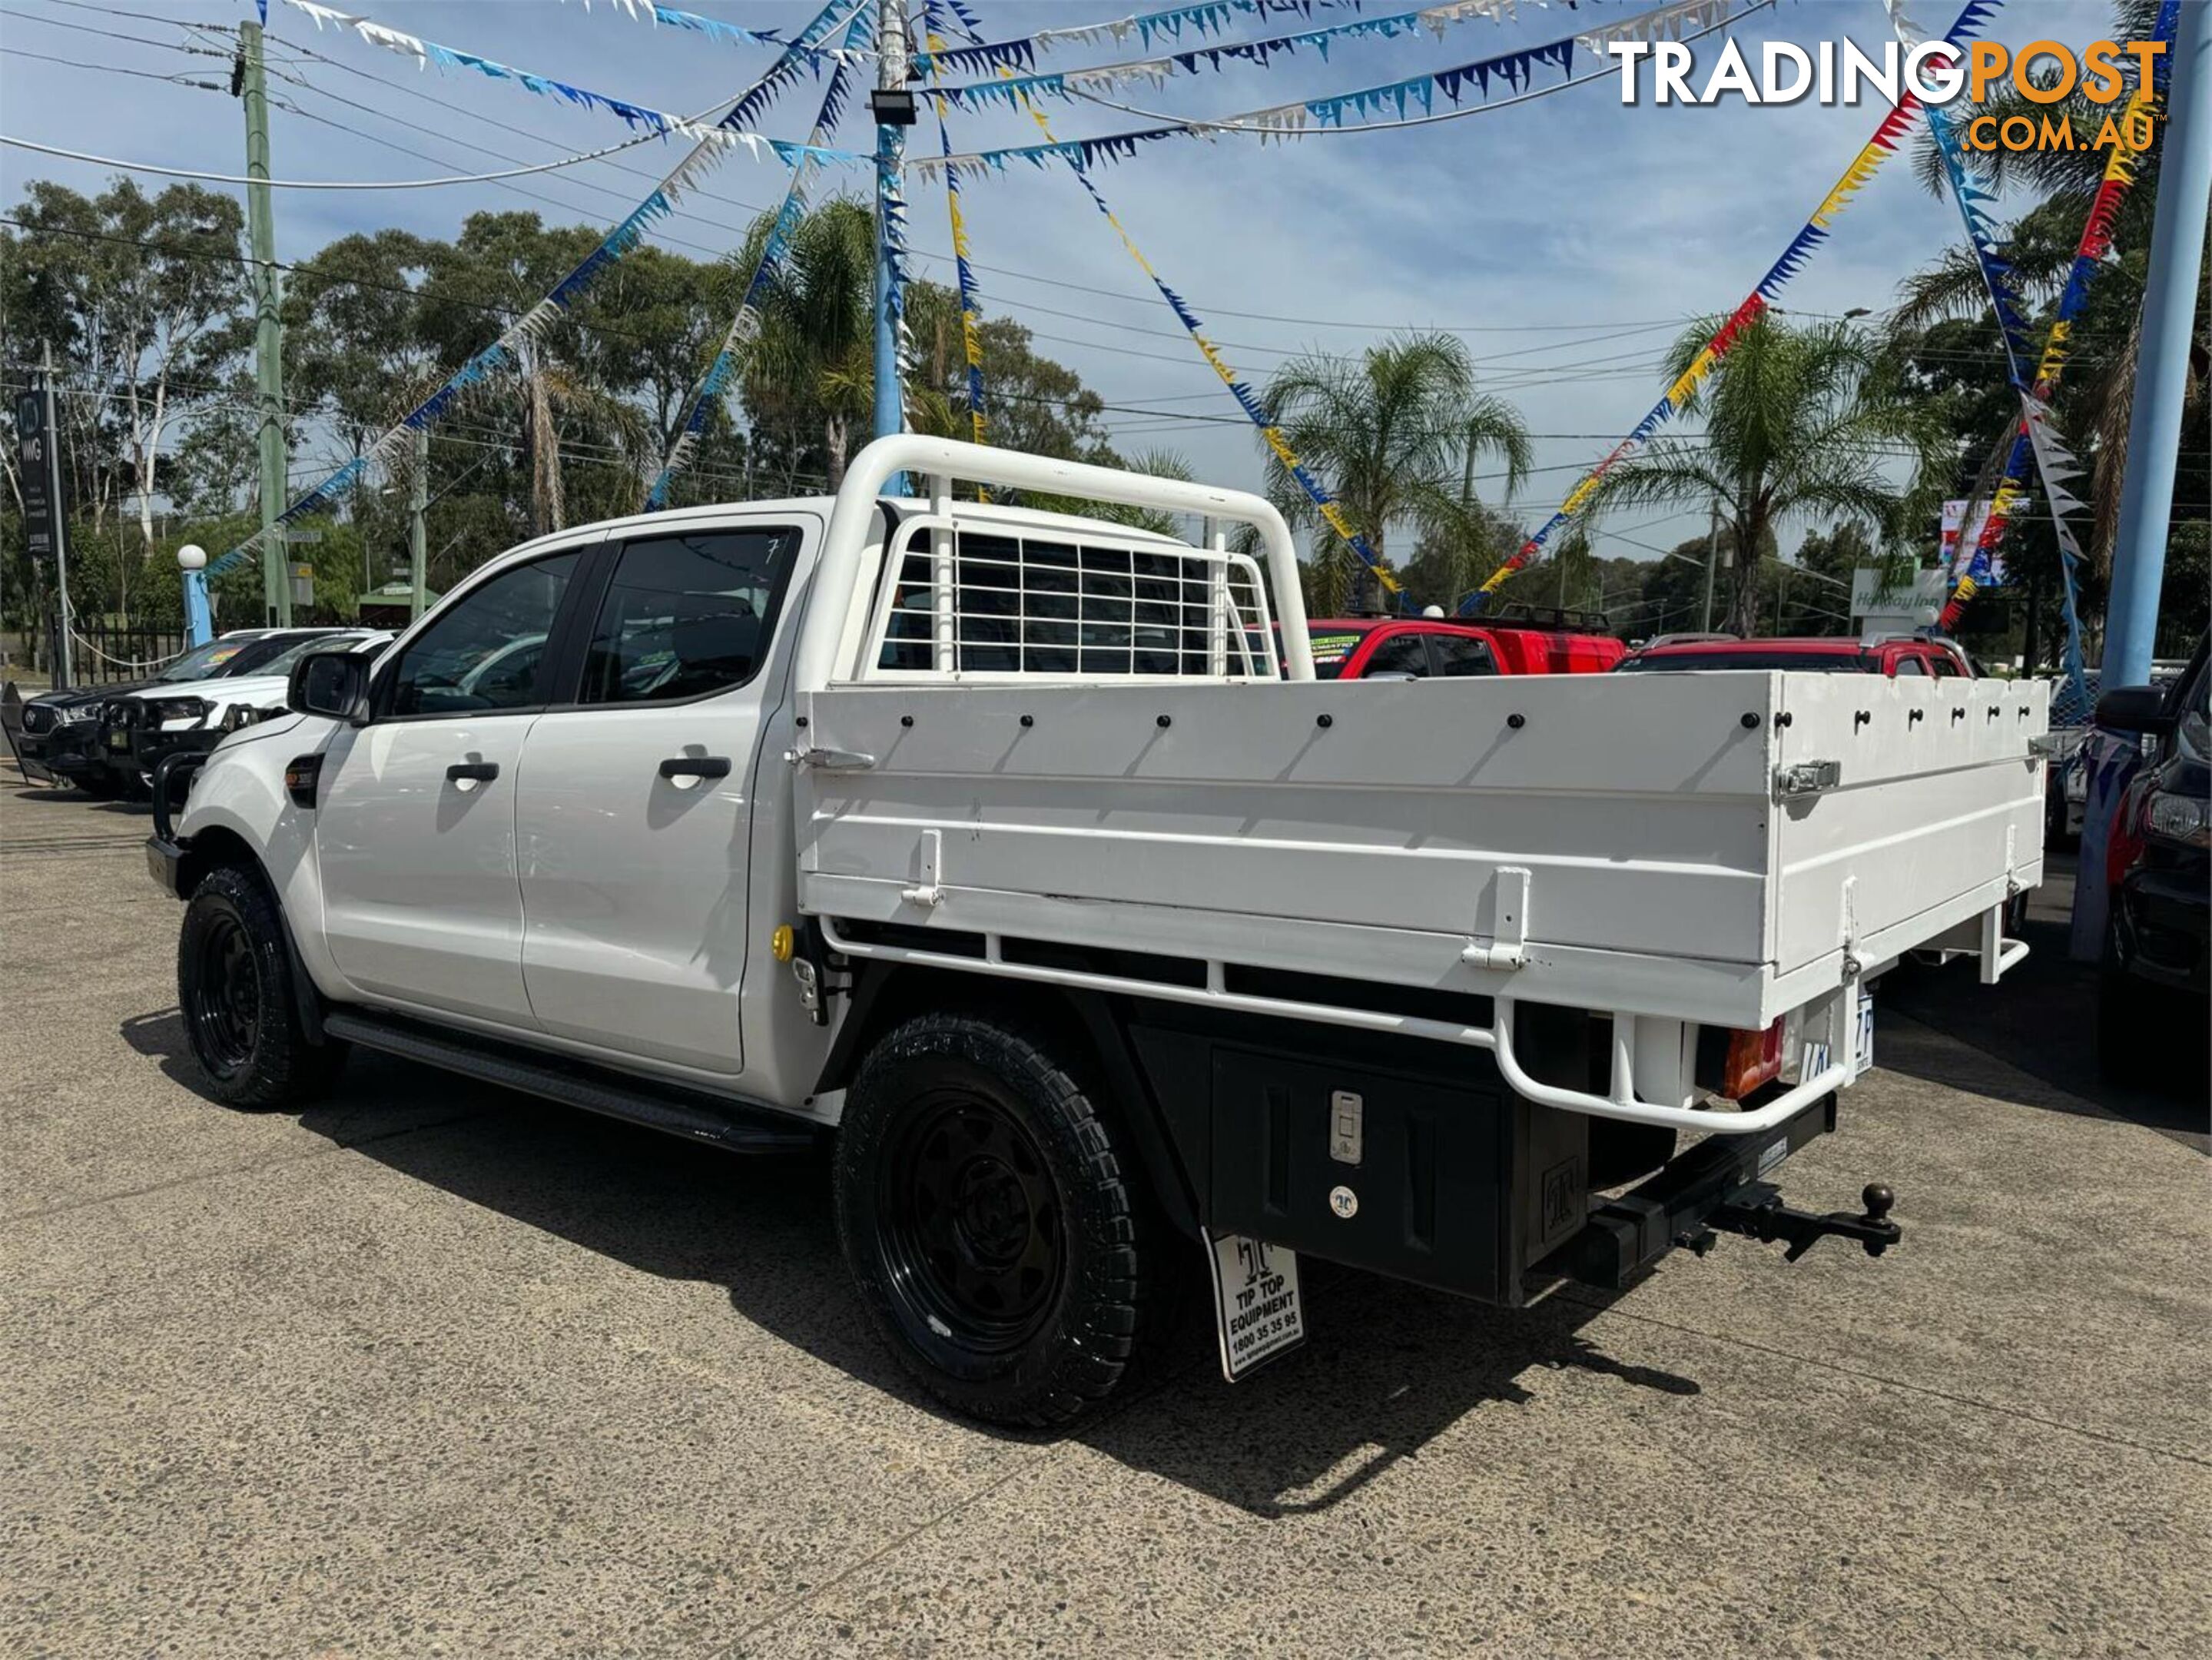 2020 FORD RANGER XL PXMKIII2020 25MY CAB CHASSIS